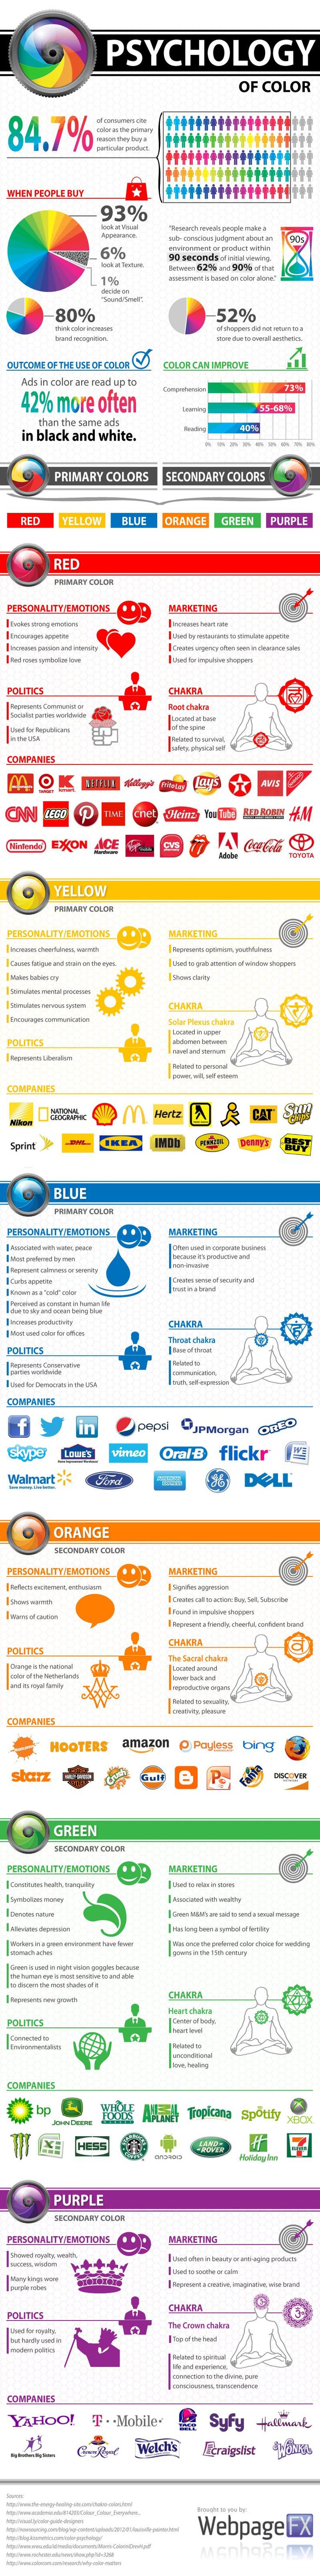 1532579547_523_Marketing-Infographic-Curious-about-the-psychology-of-color-Wondering-how-color-influences-marketing Marketing Infographic : Curious about the psychology of color? Wondering how color influences marketing ...